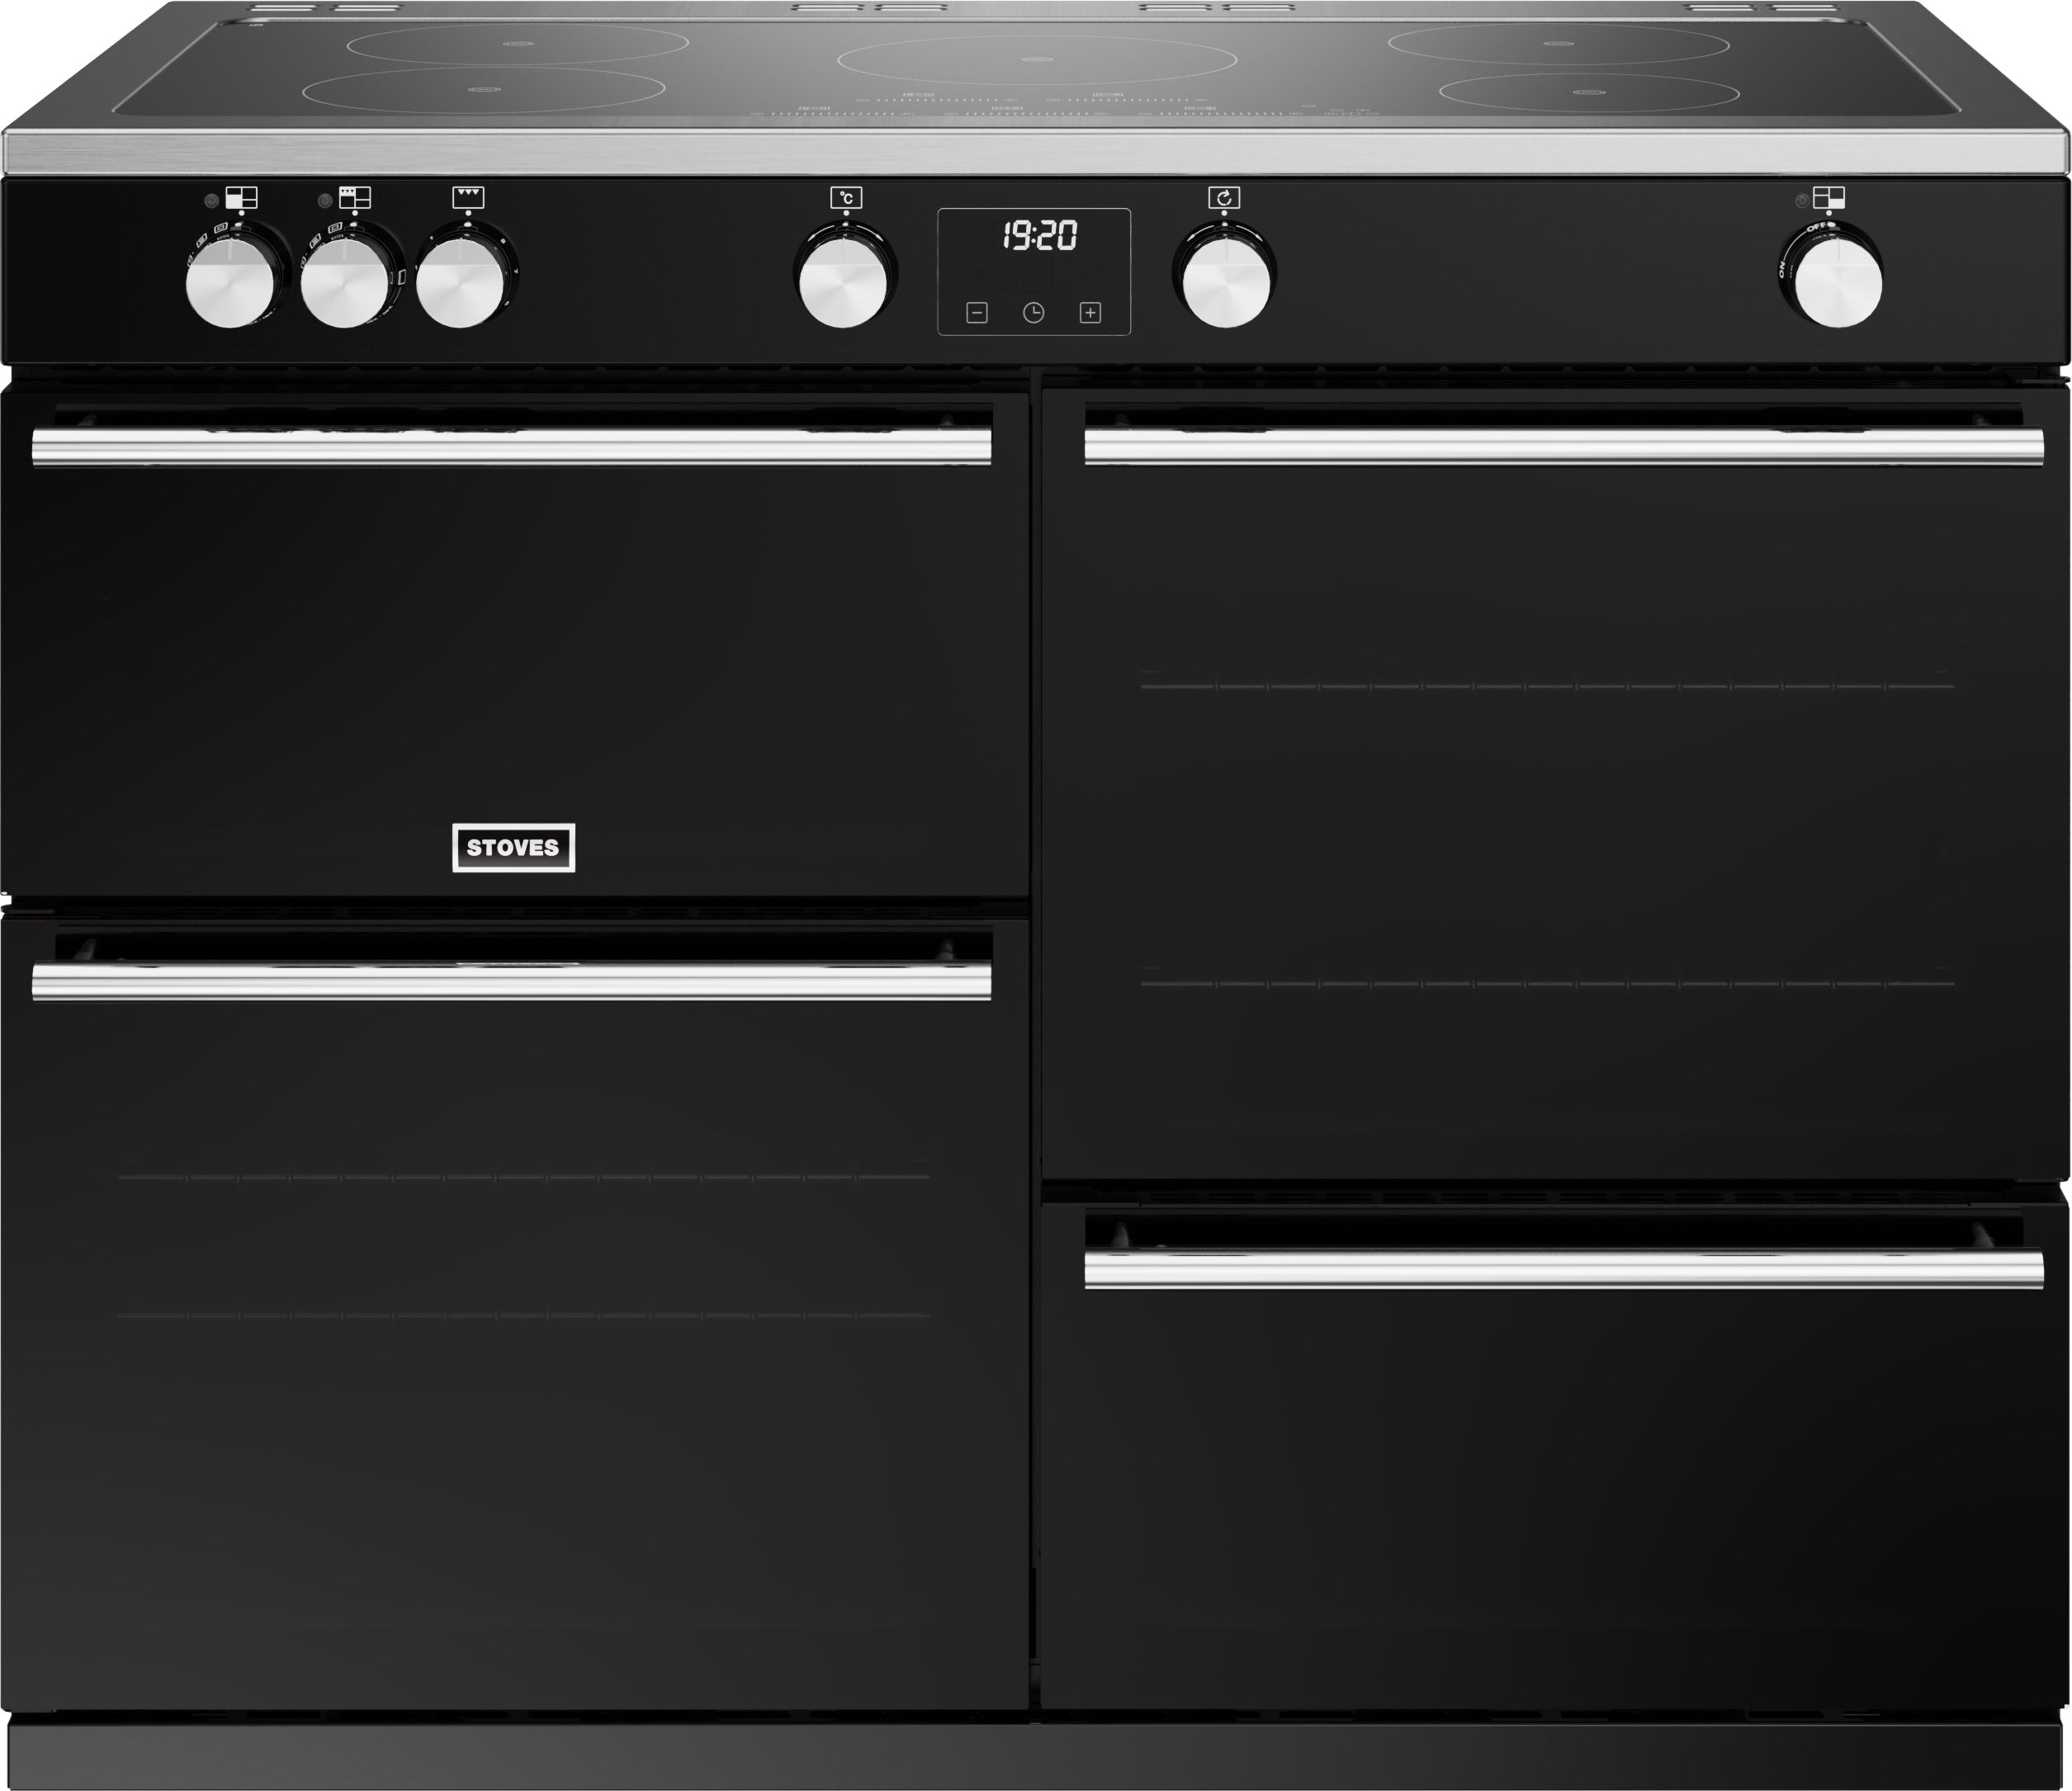 Stoves Precision Deluxe ST DX PREC D1100Ei TCH BK 110cm Electric Range Cooker with Induction Hob - Black - A Rated, Black